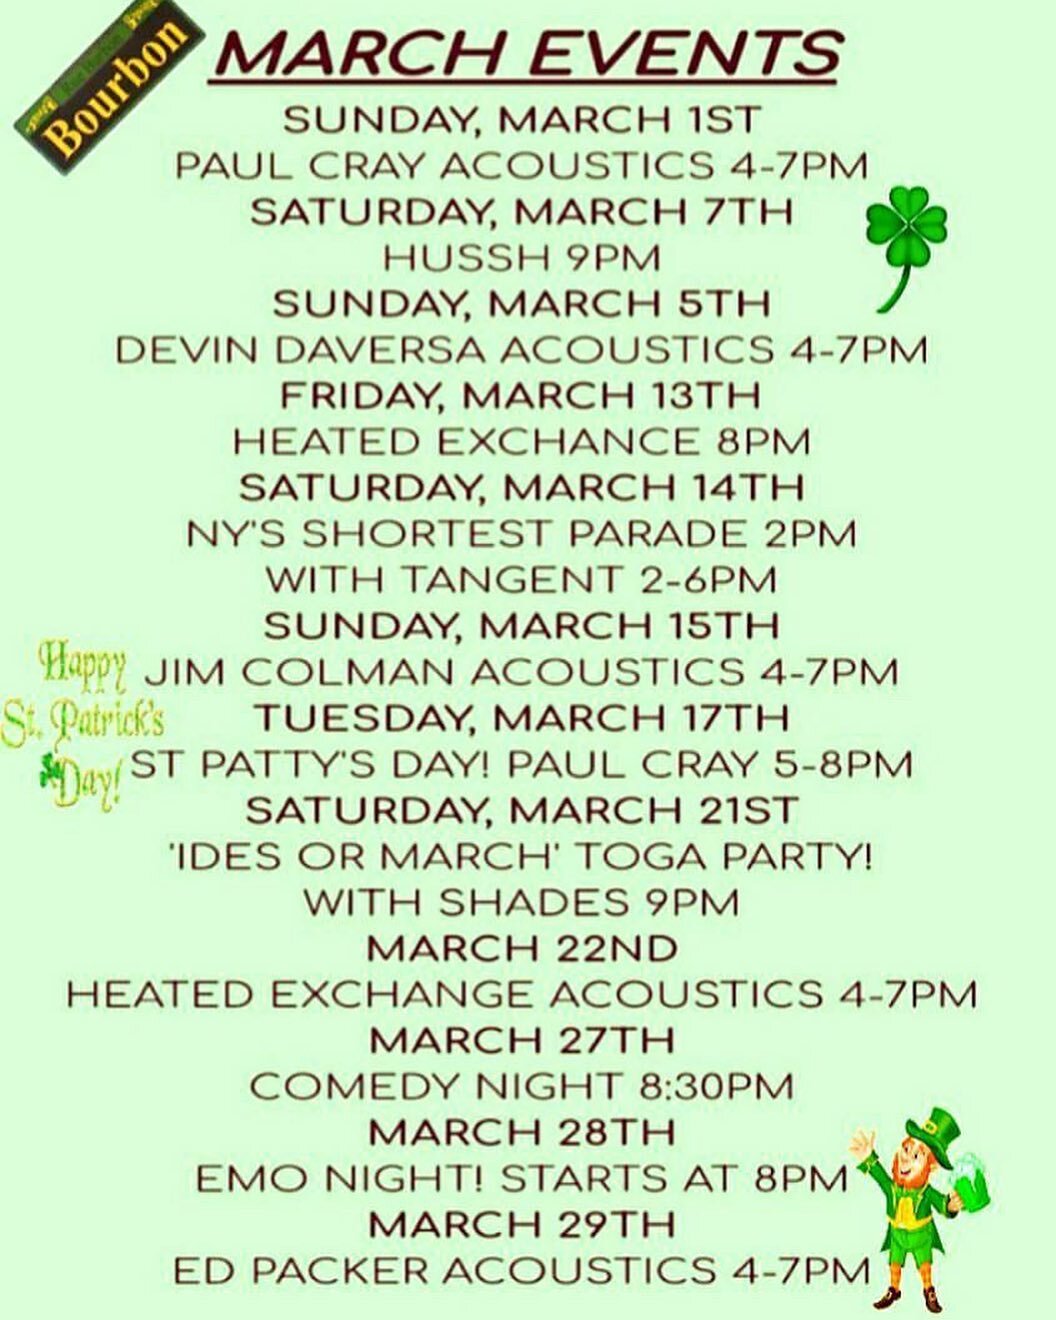 Spring has sprung! It&rsquo;s going to be an eventful March at  Bourbon St!!!! Don&rsquo;t forget to stop by to get in on the fun🍻🎶🍀🌞🌈🥳